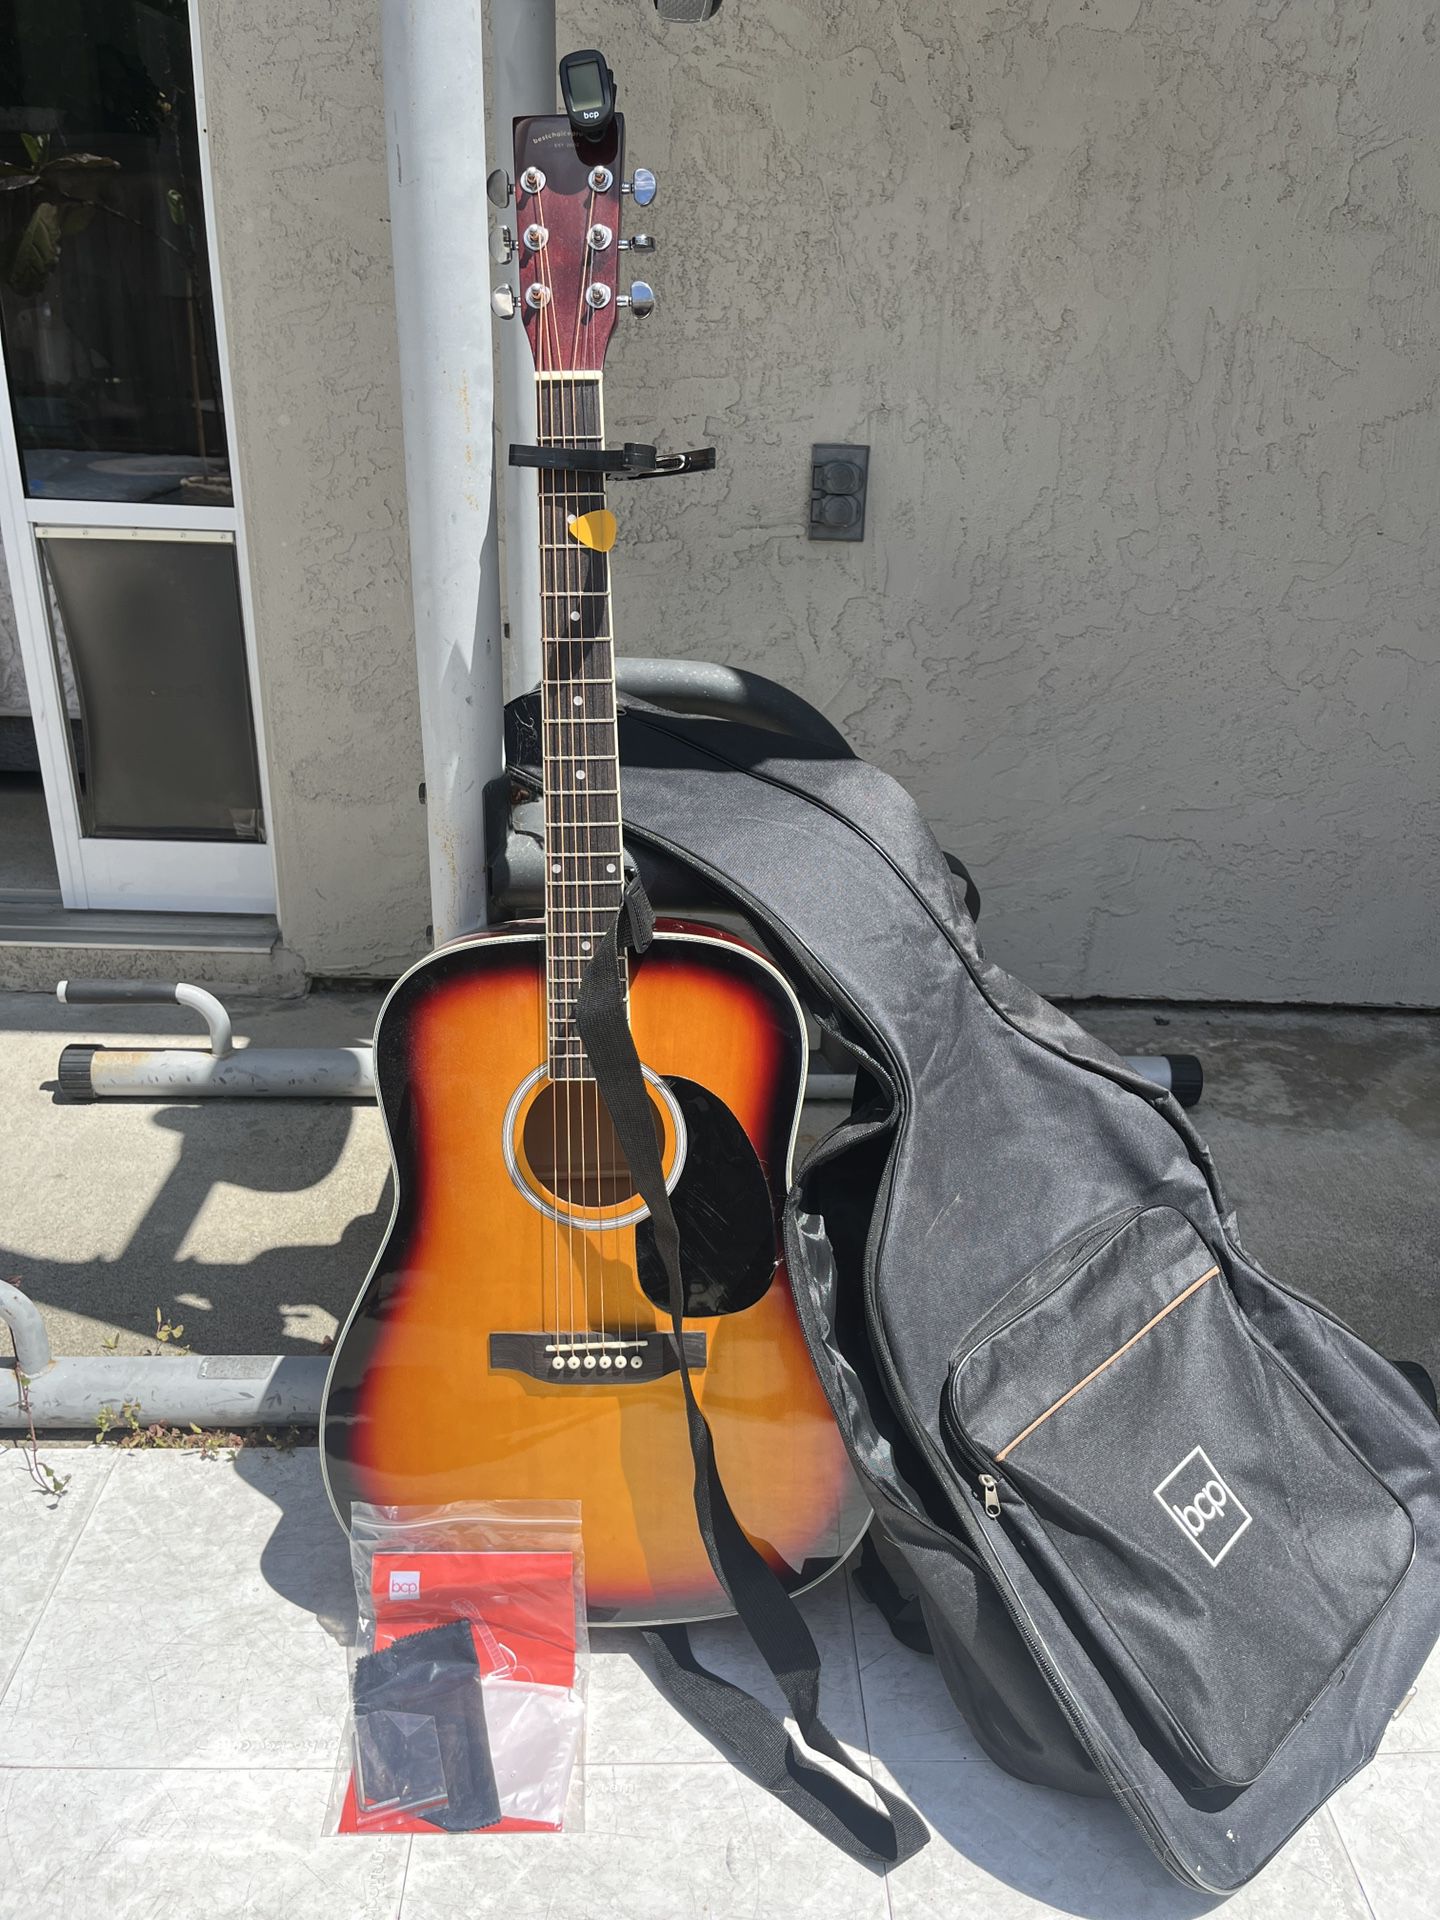 Practically new acoustic guitar